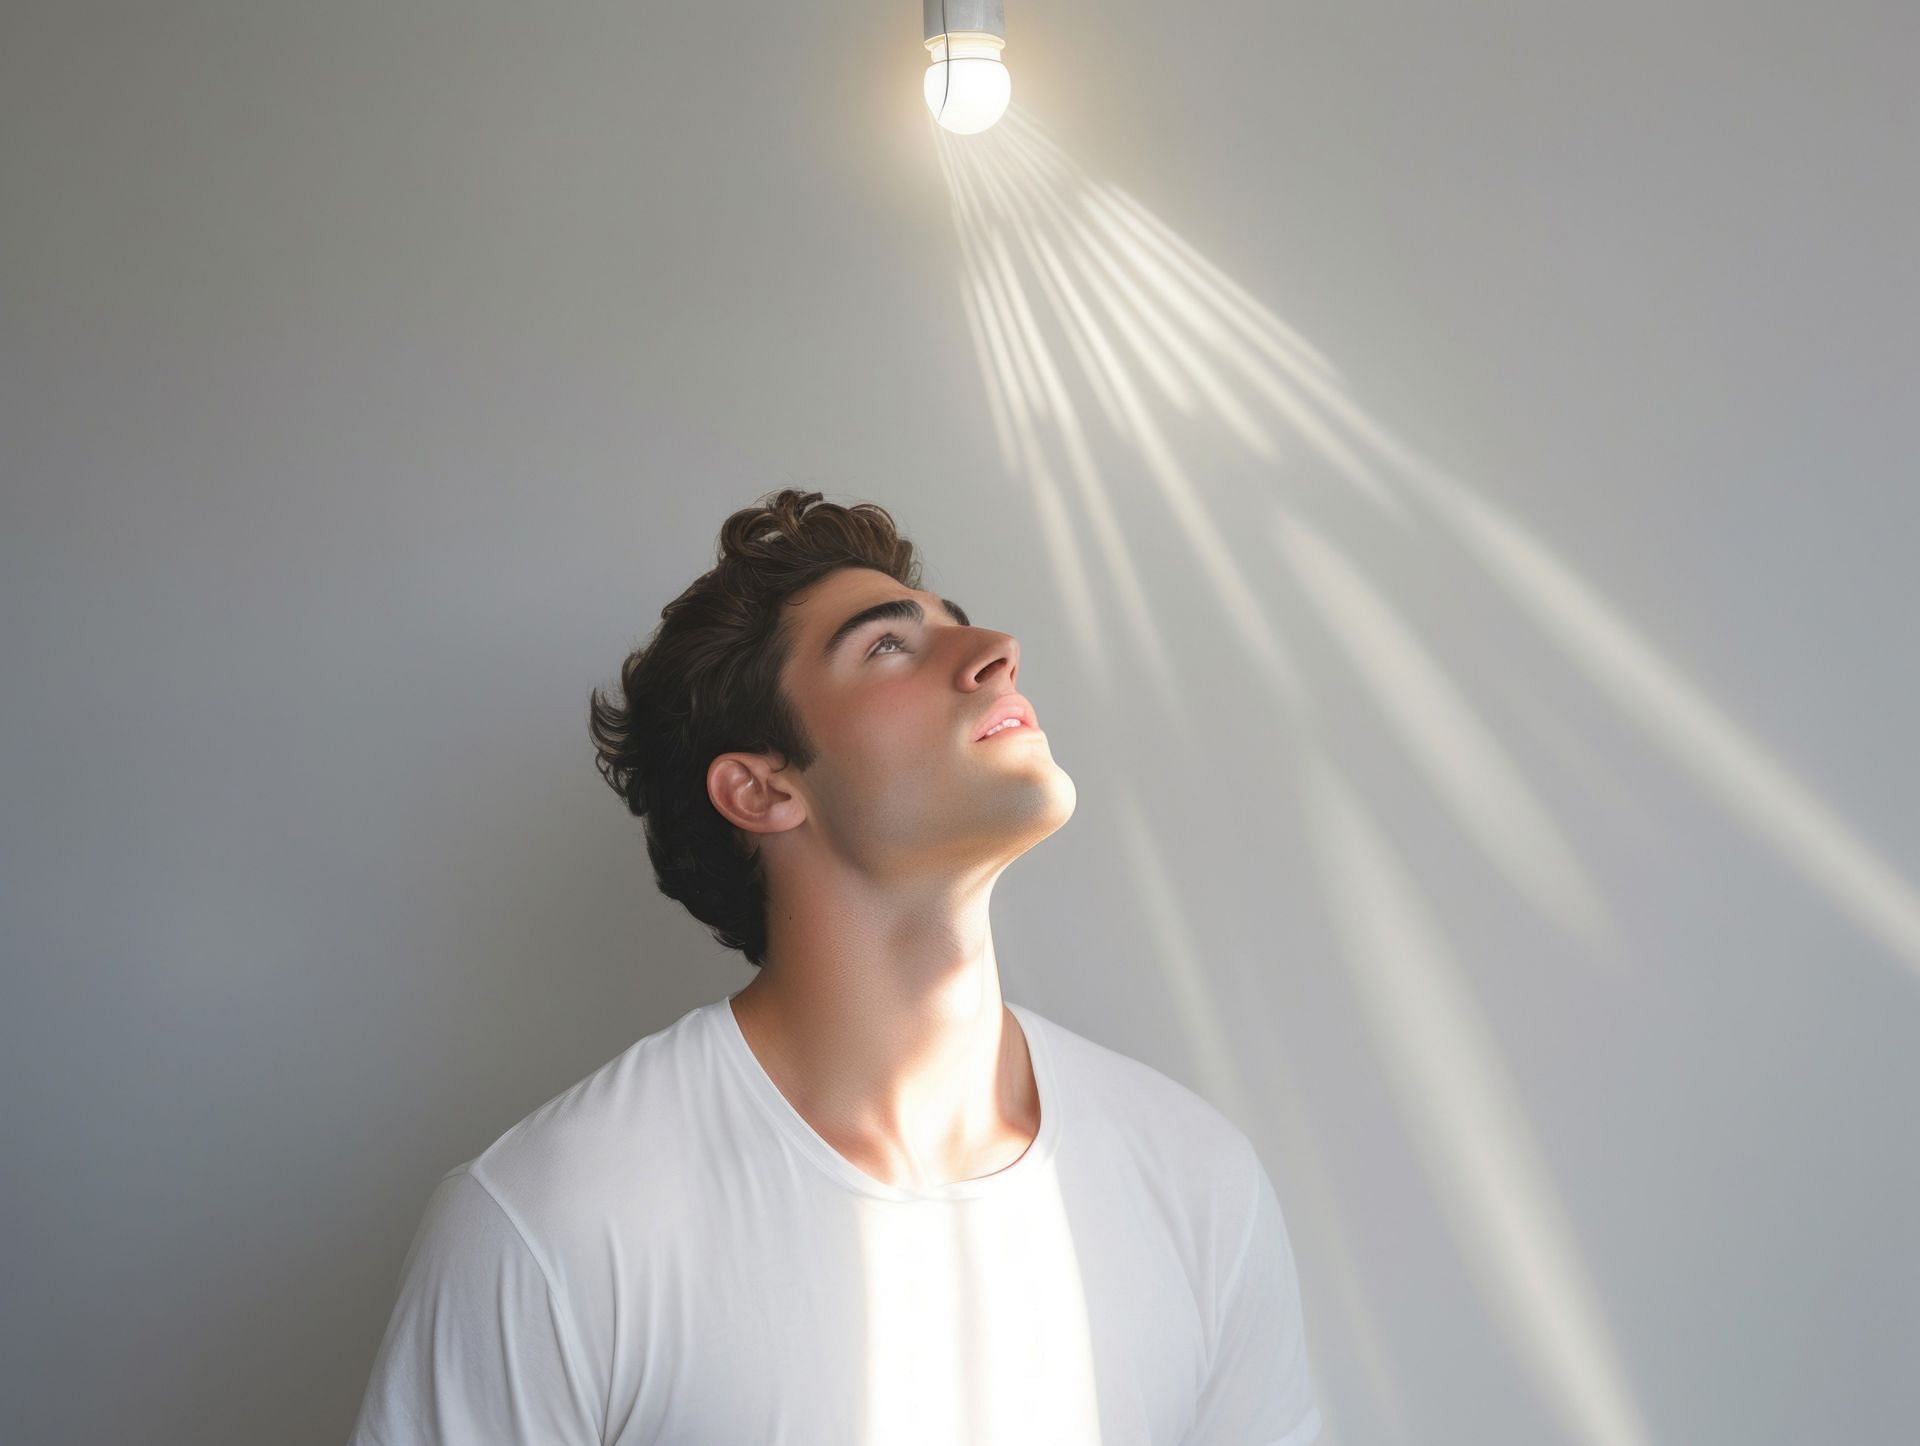 Sun lamp for depression can be effective since it mimics the effects of real sunlight. (Image via Vecteezy/Loucaski)